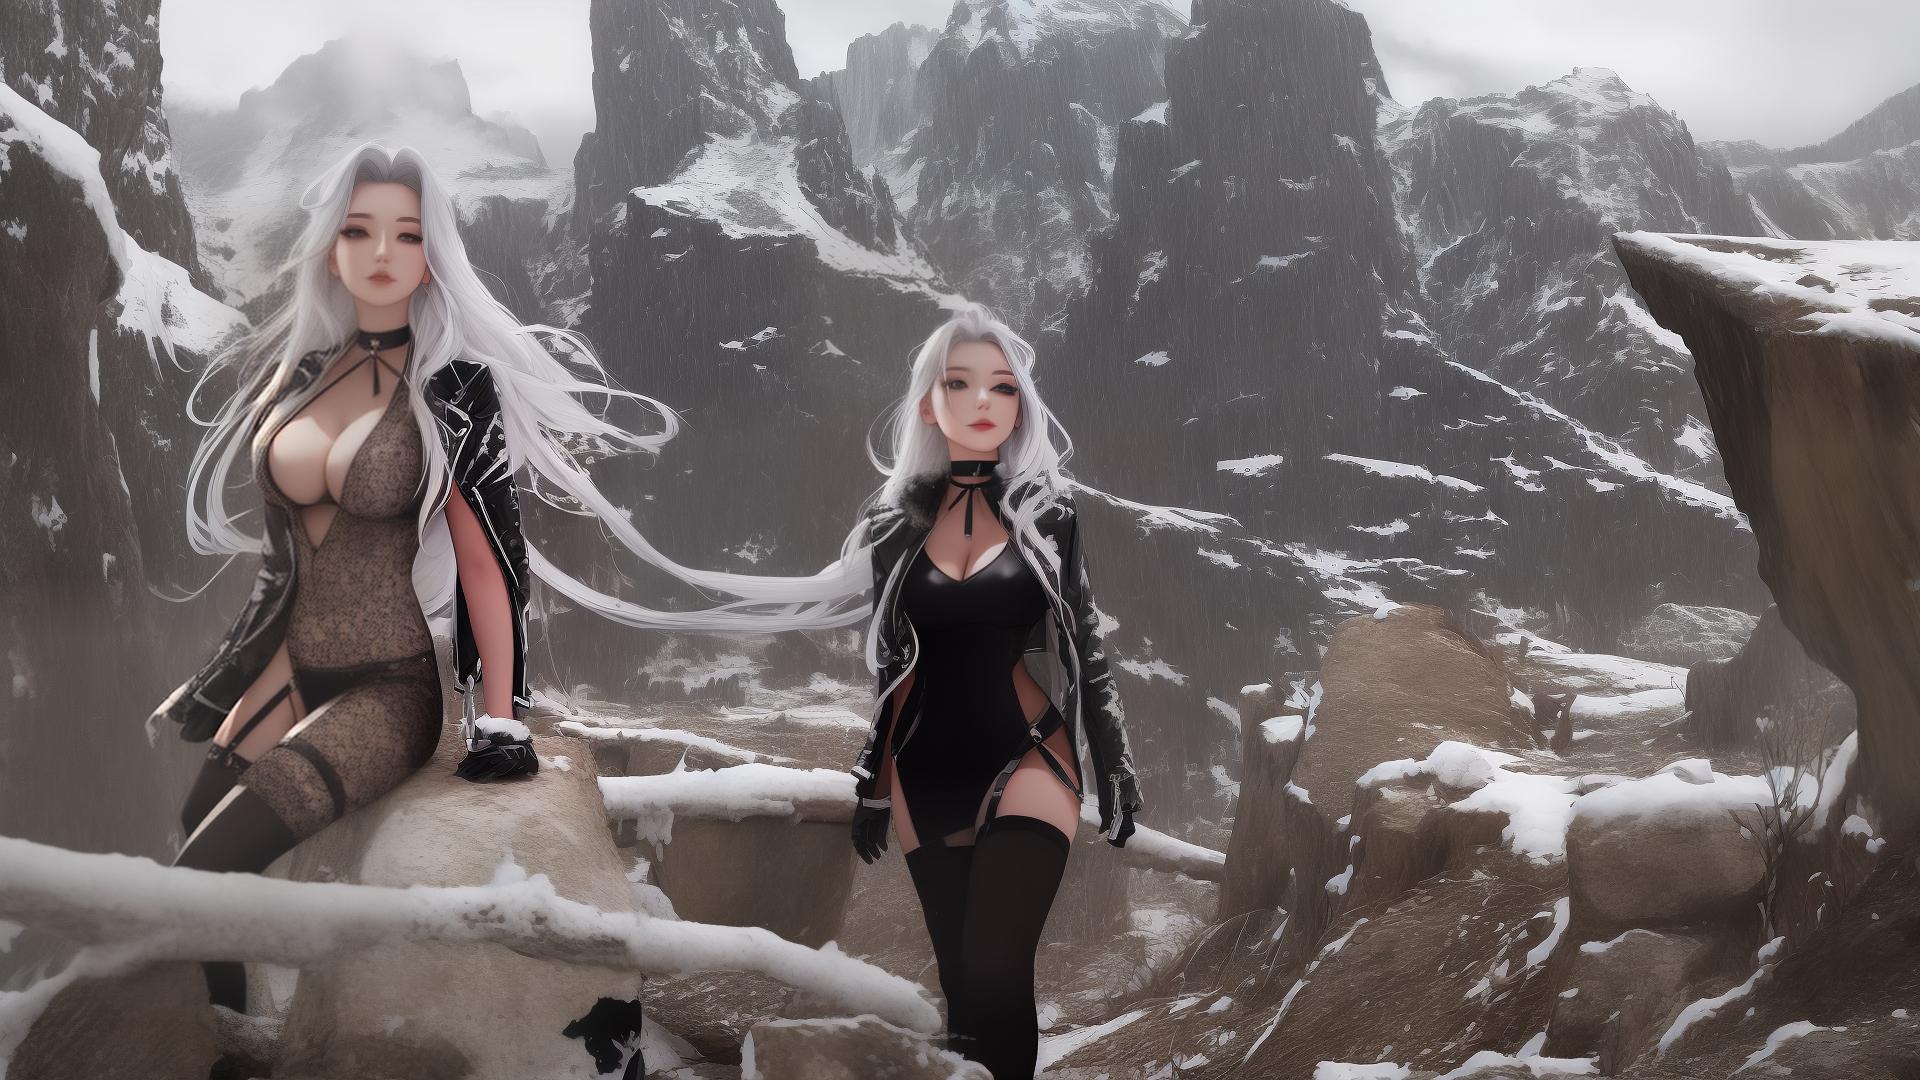  masterpiece, best quality, boobs,thigh highs,landscape,white hair,long hair,black outfit,choker around neck,winter,solo,posing